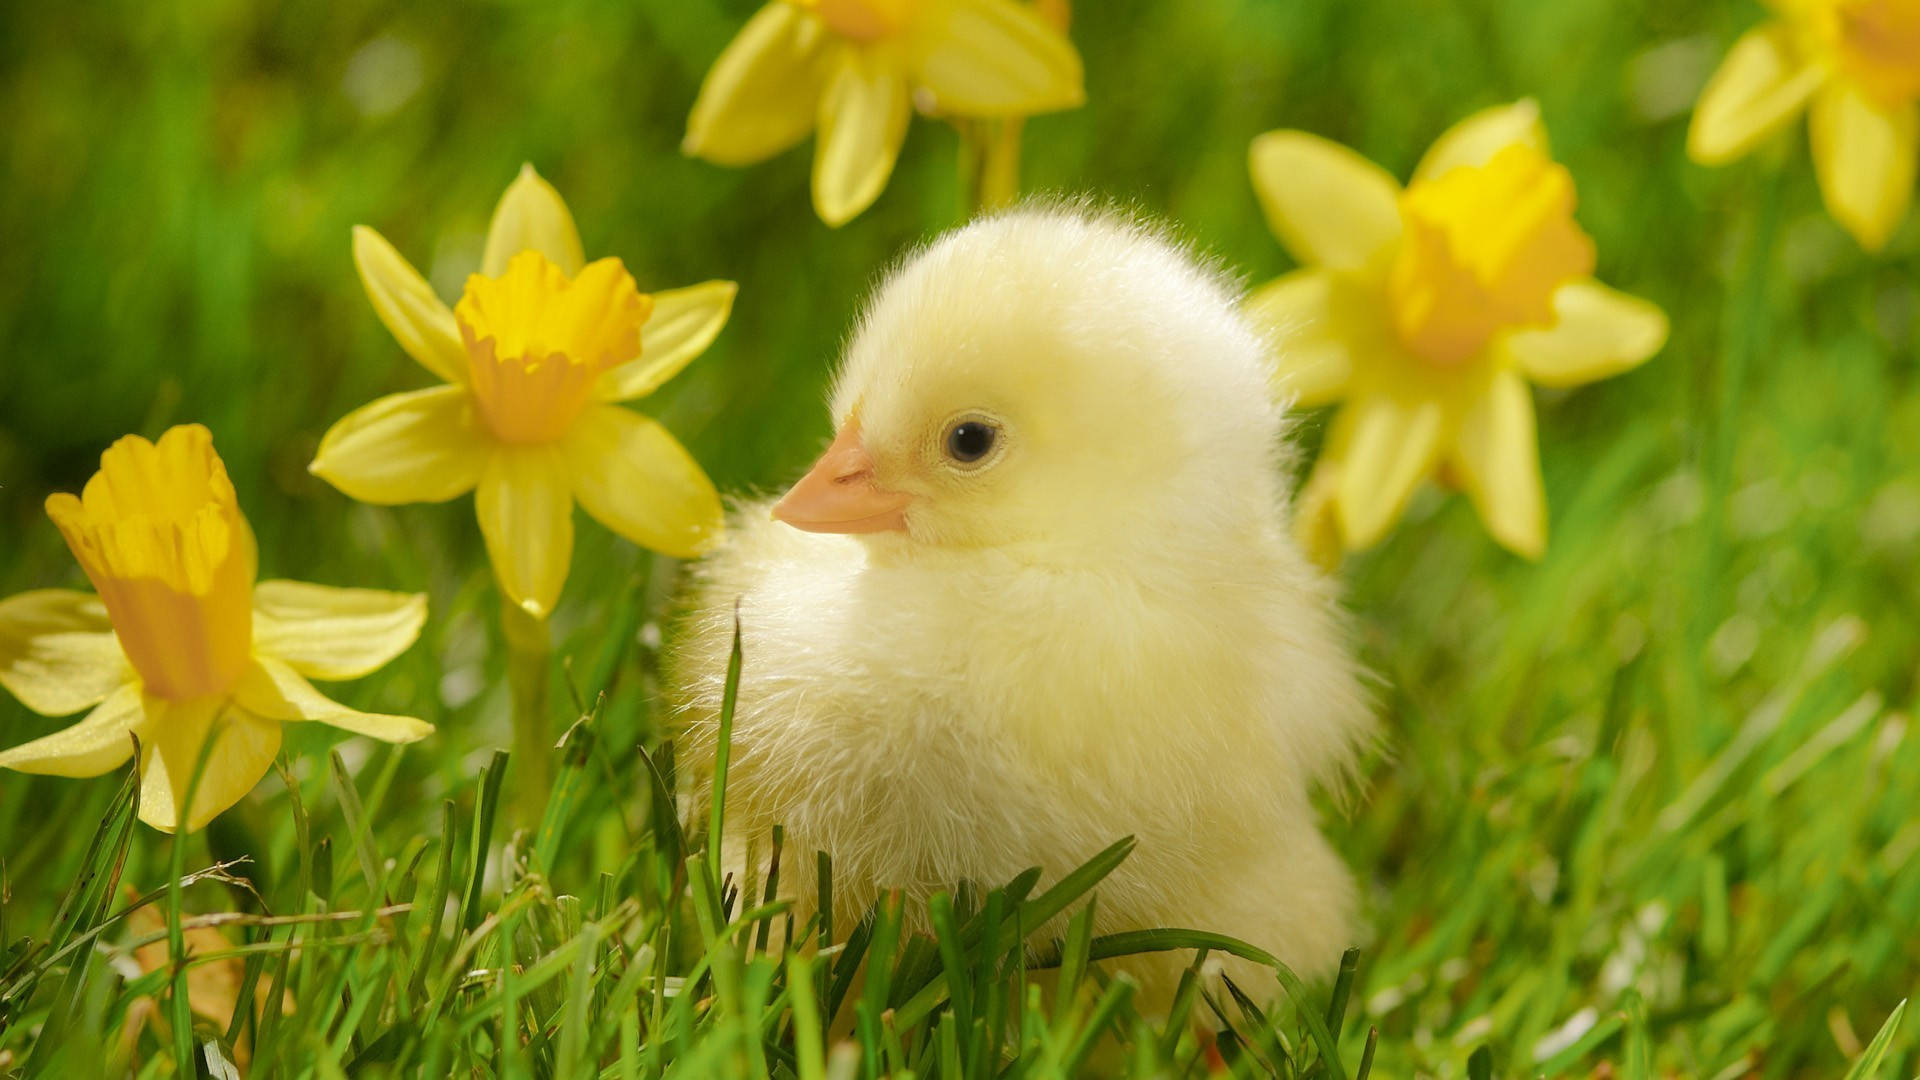 Cute Spring Chick Background